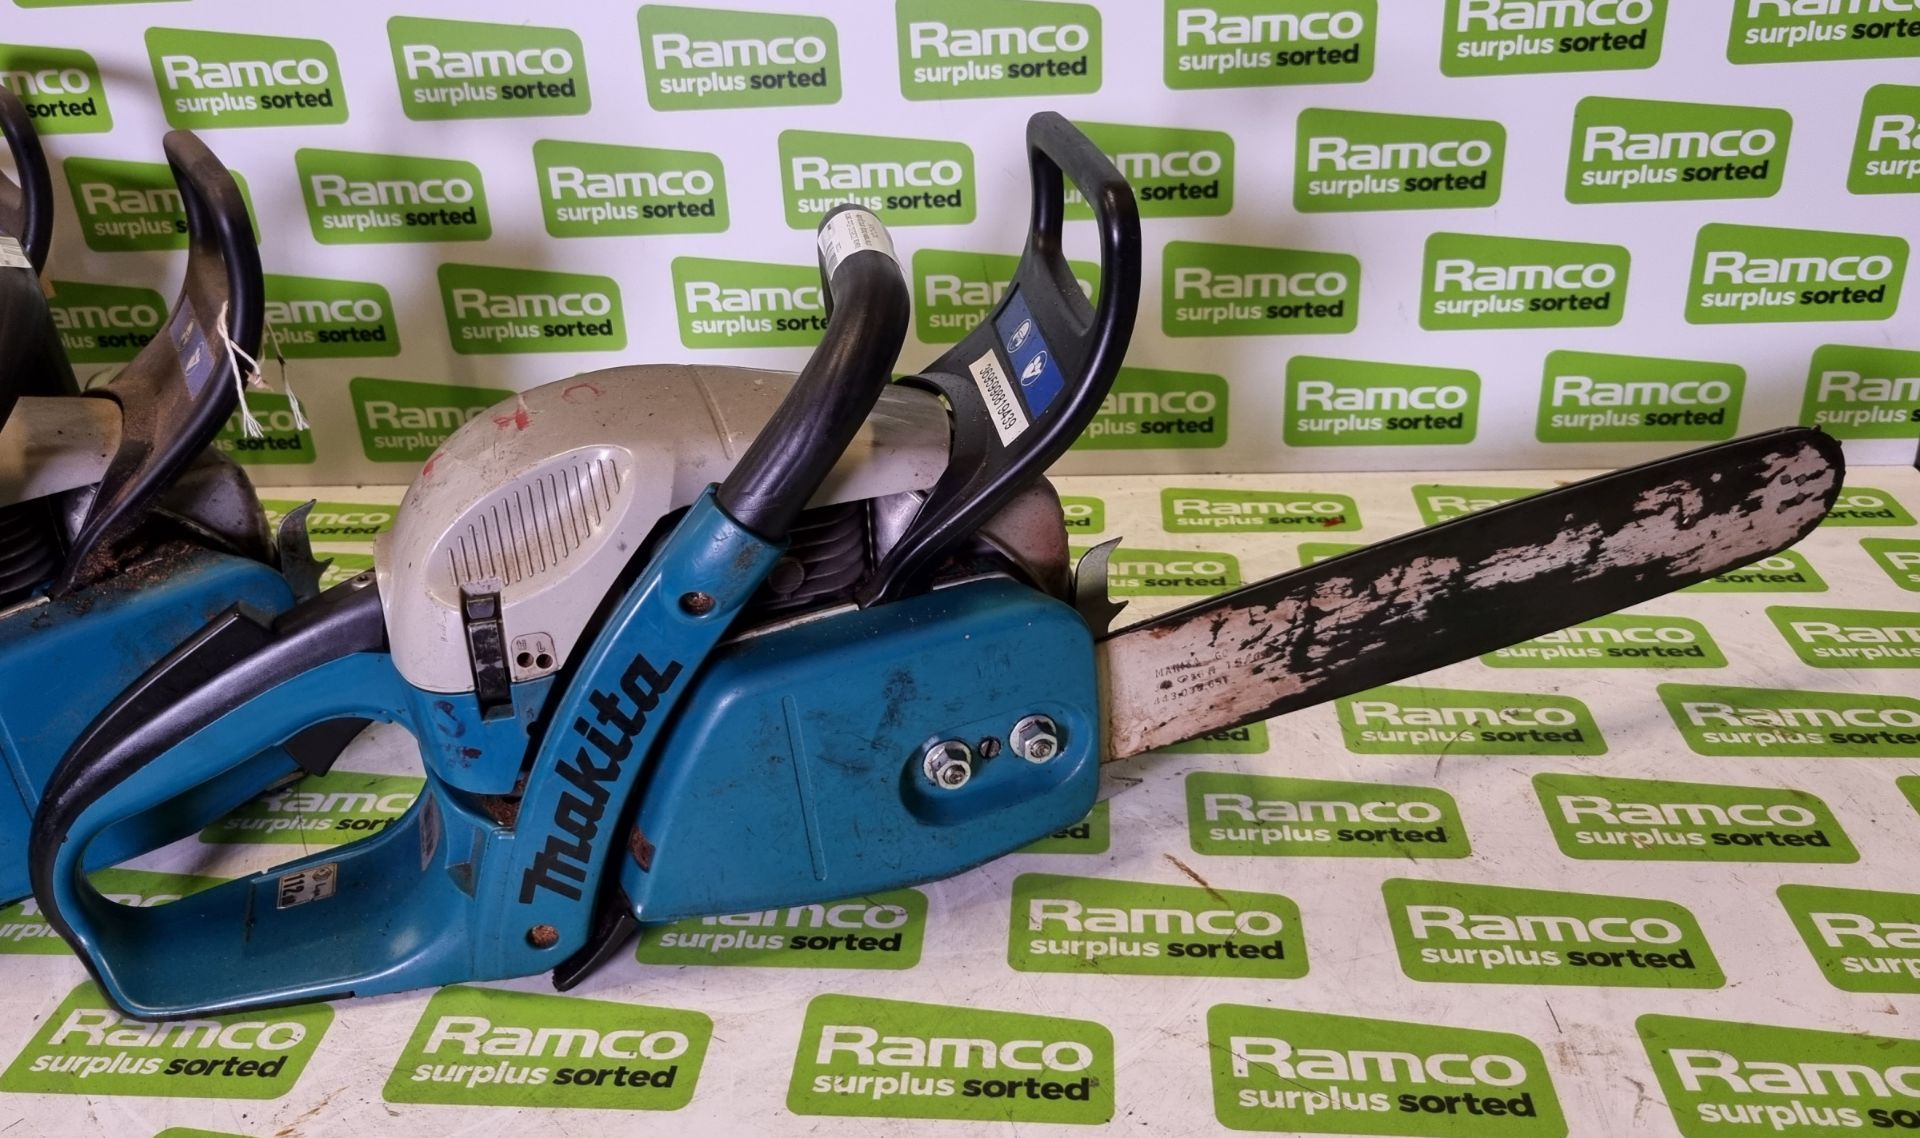 4x Makita DCS5000 50cc petrol chainsaw bodies - AS SPARES OR REPAIRS - Image 7 of 9